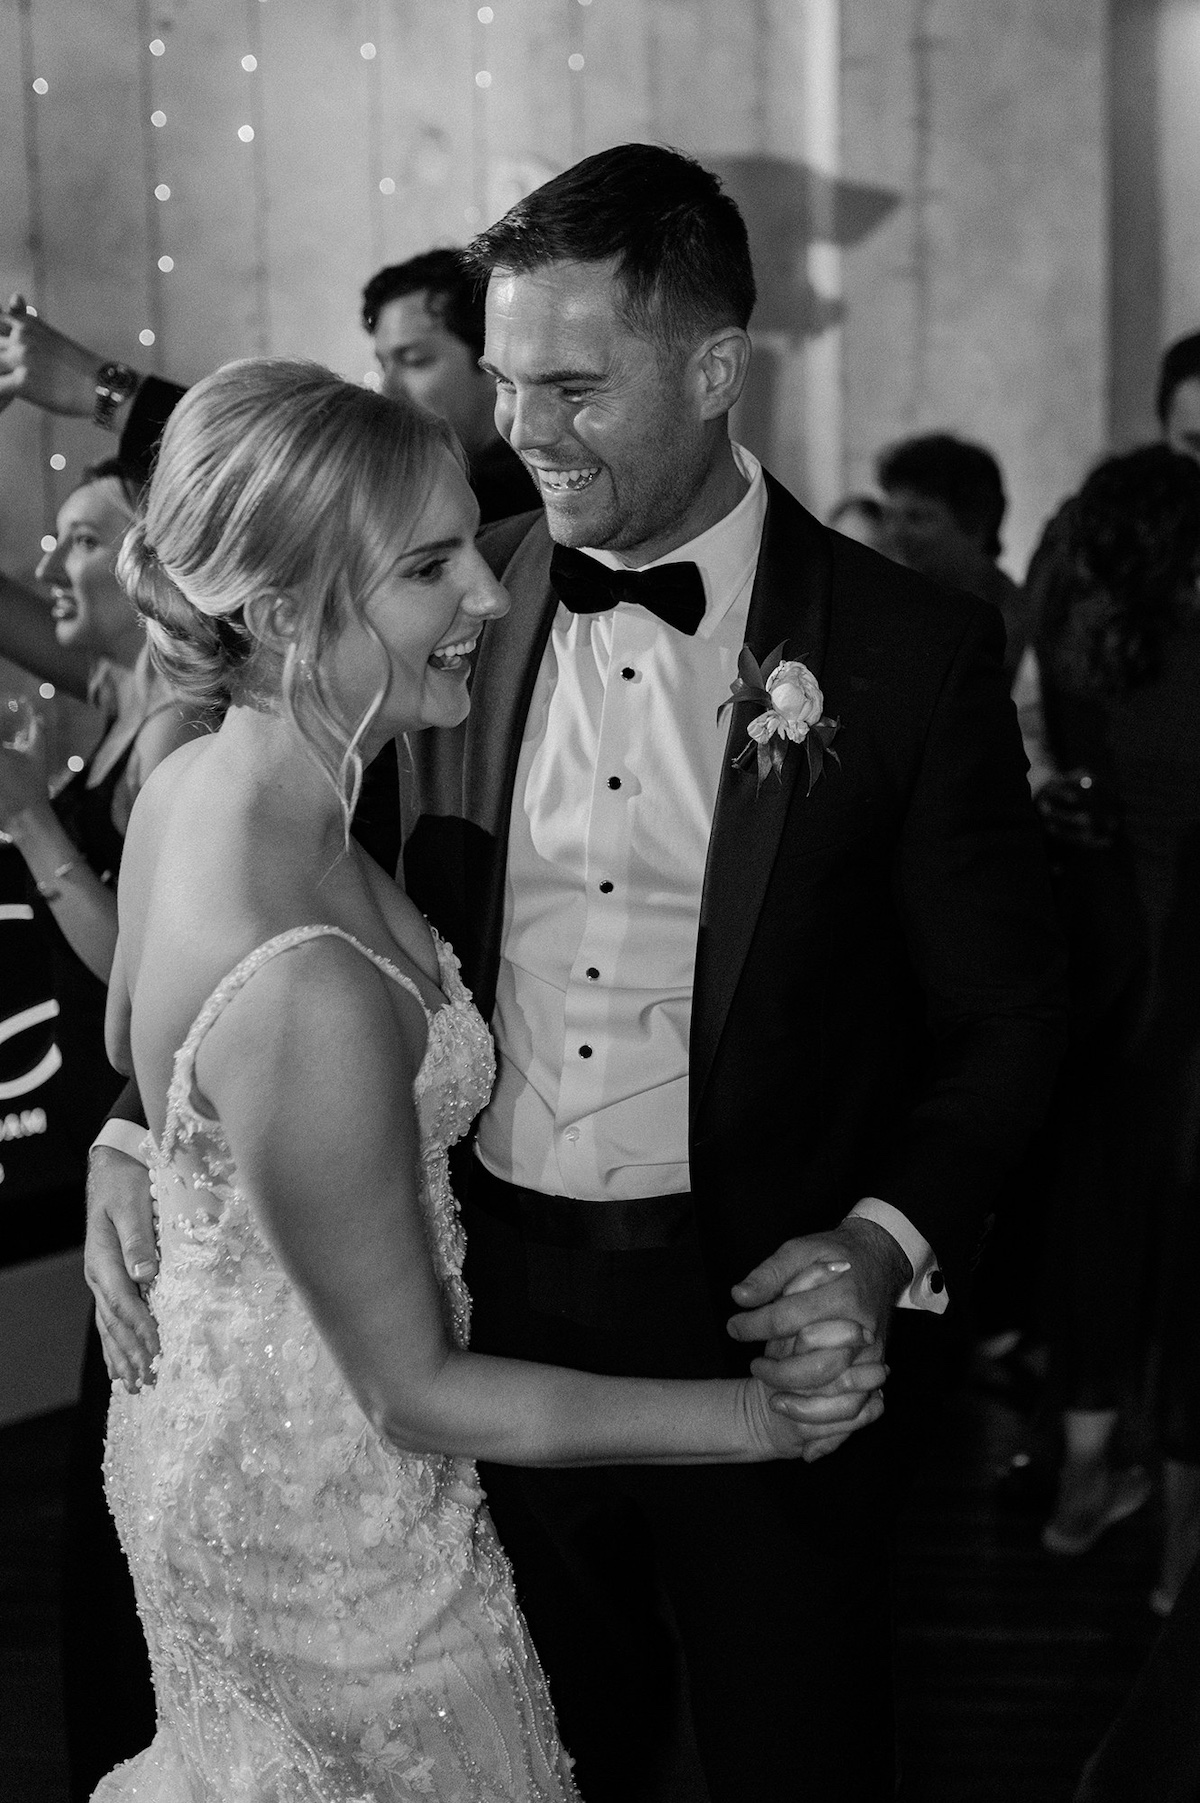 Elegance on the dance floor under the stars, where Kelly and Adam share their first dance as a married couple in a magical setting.